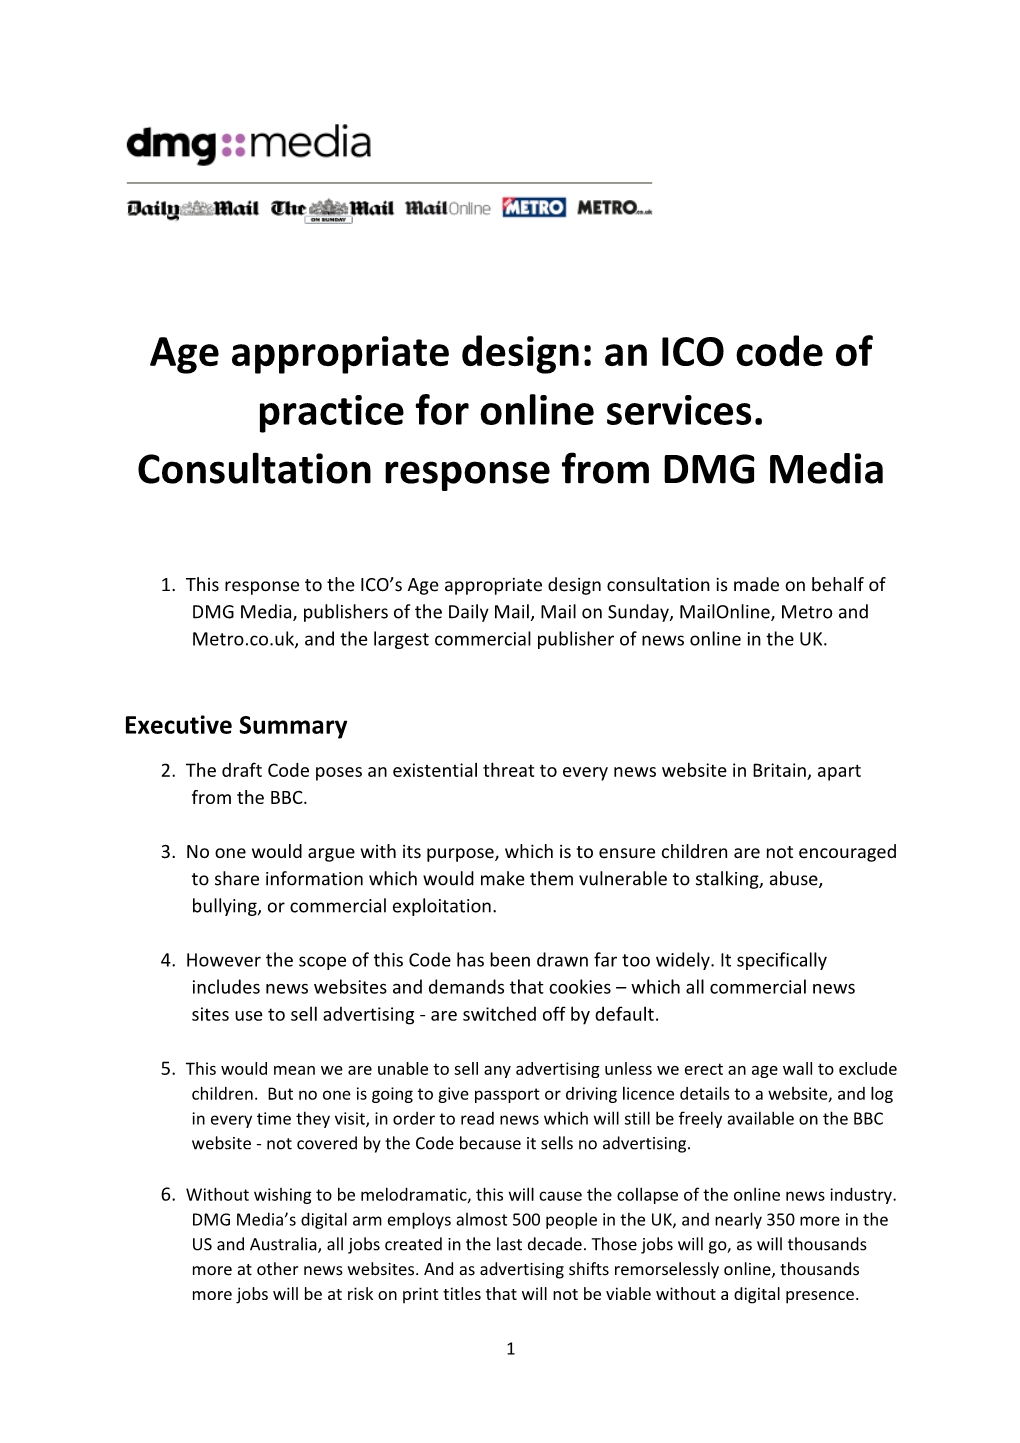 Age Appropriate Design: an ICO Code of Practice for Online Services